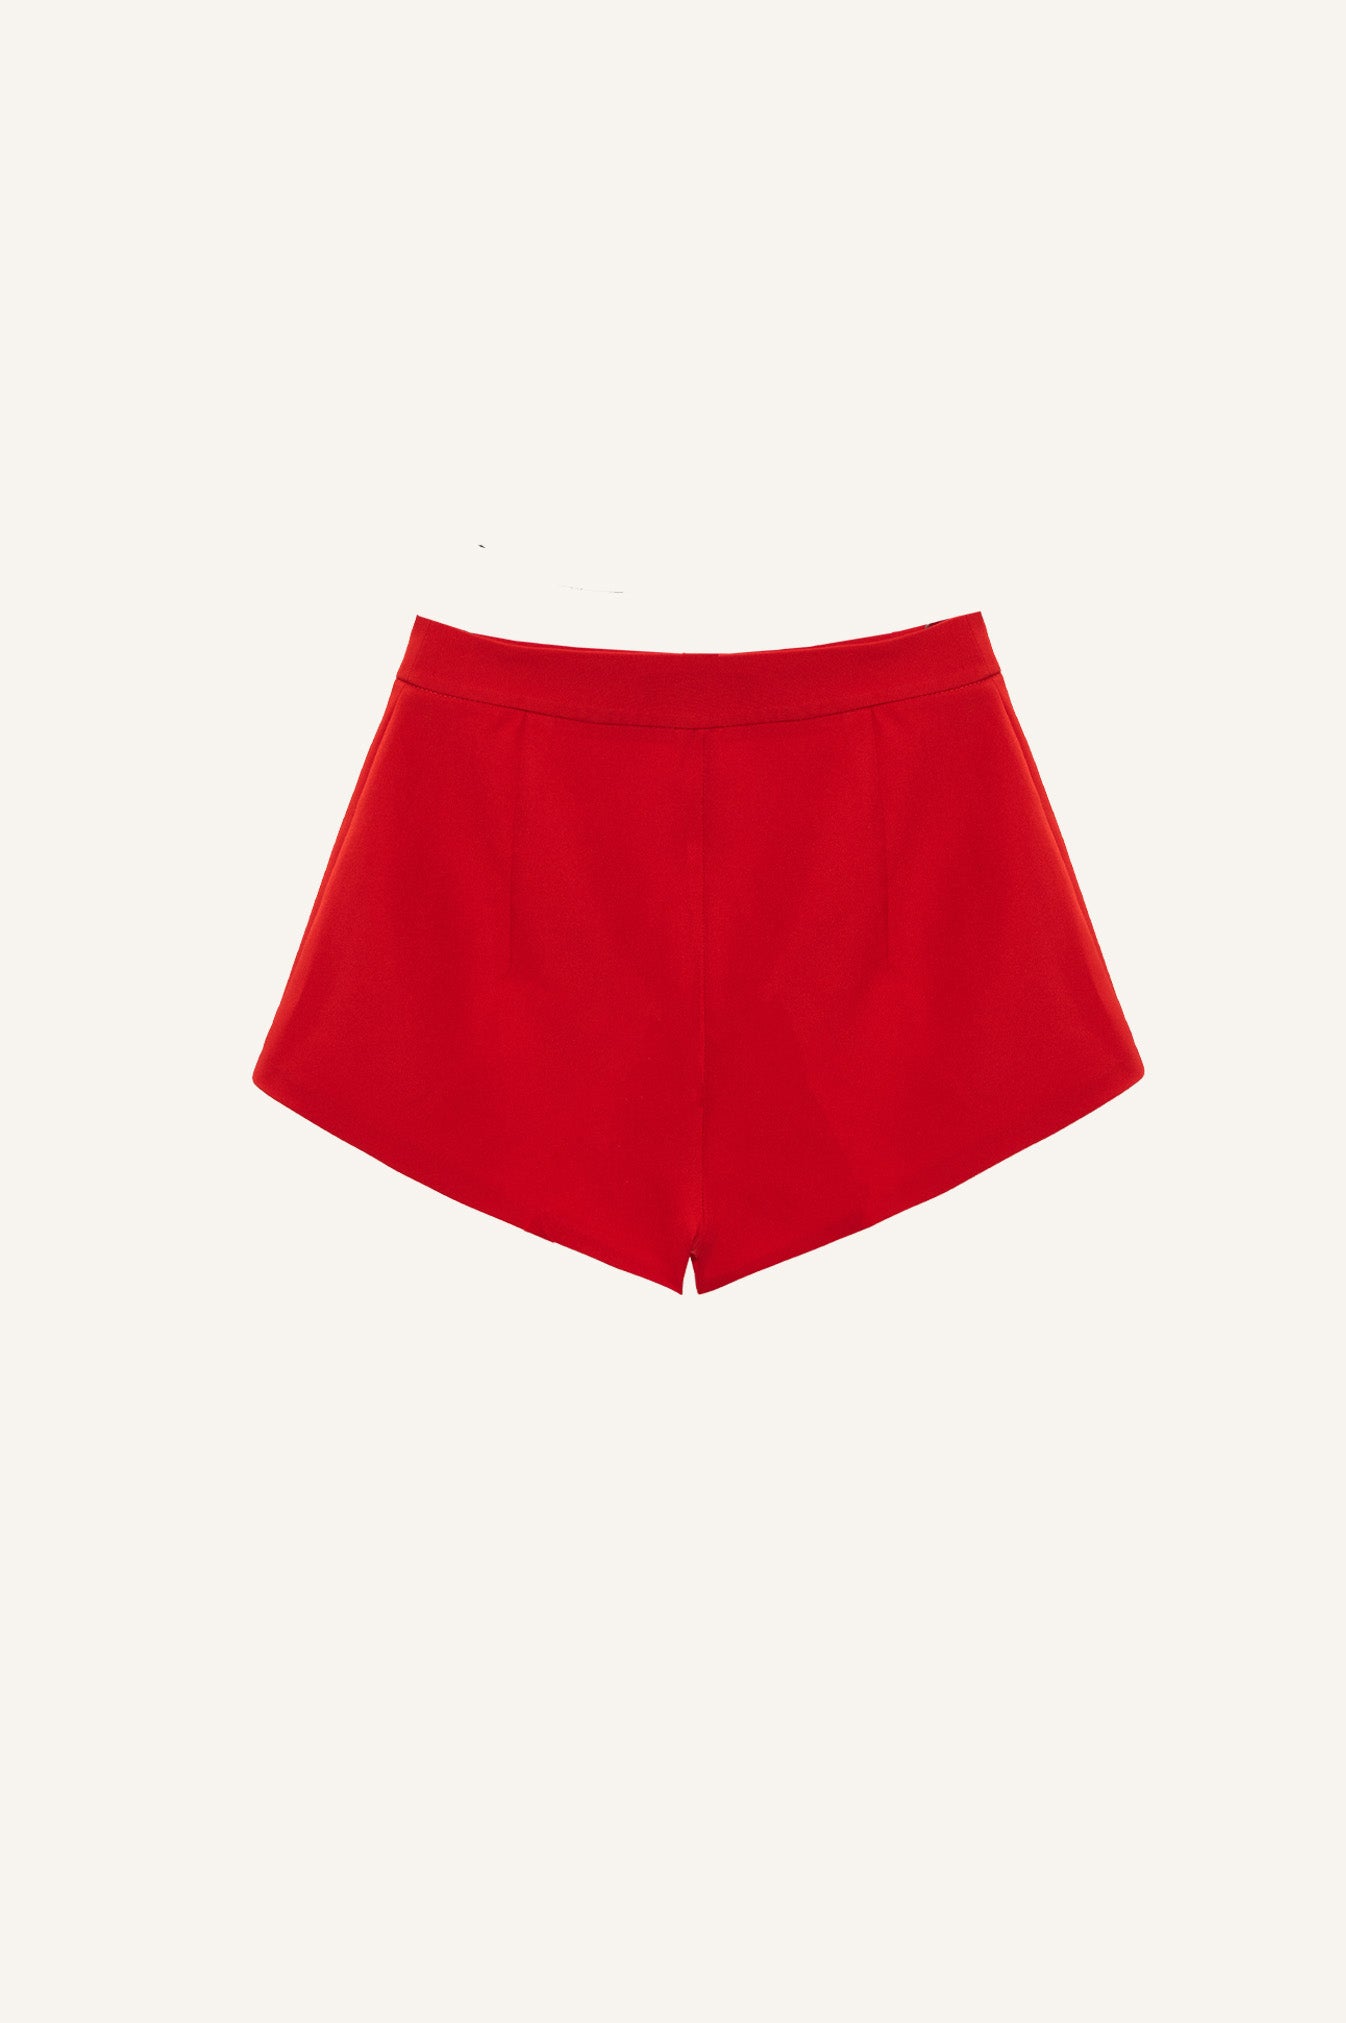 MICRO SHORTS IN RED